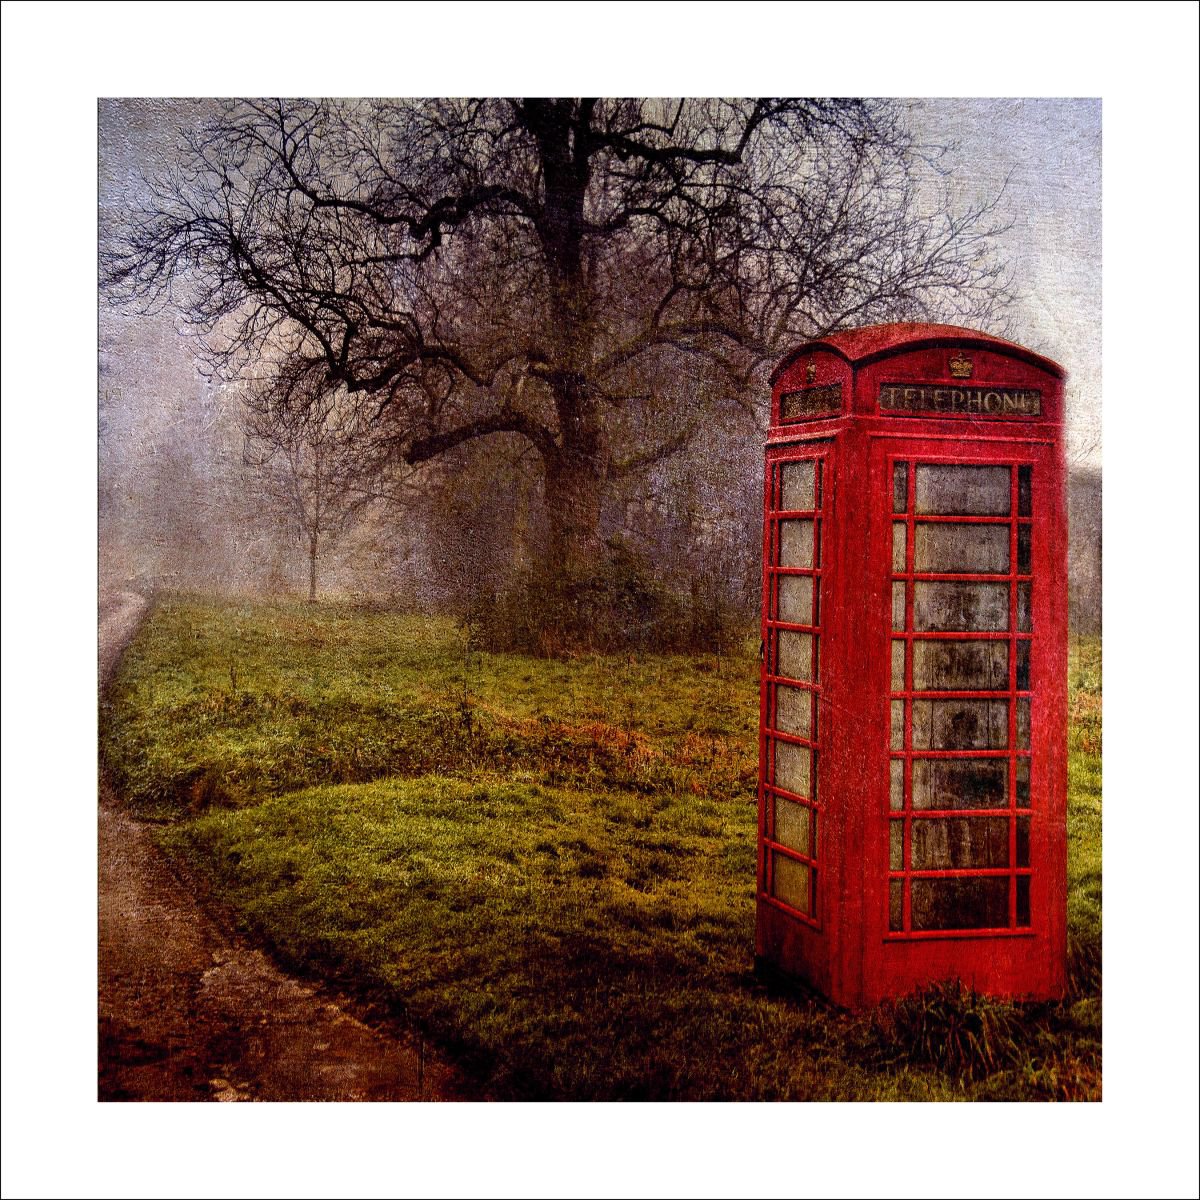 The Red Phone Box by Martin  Fry